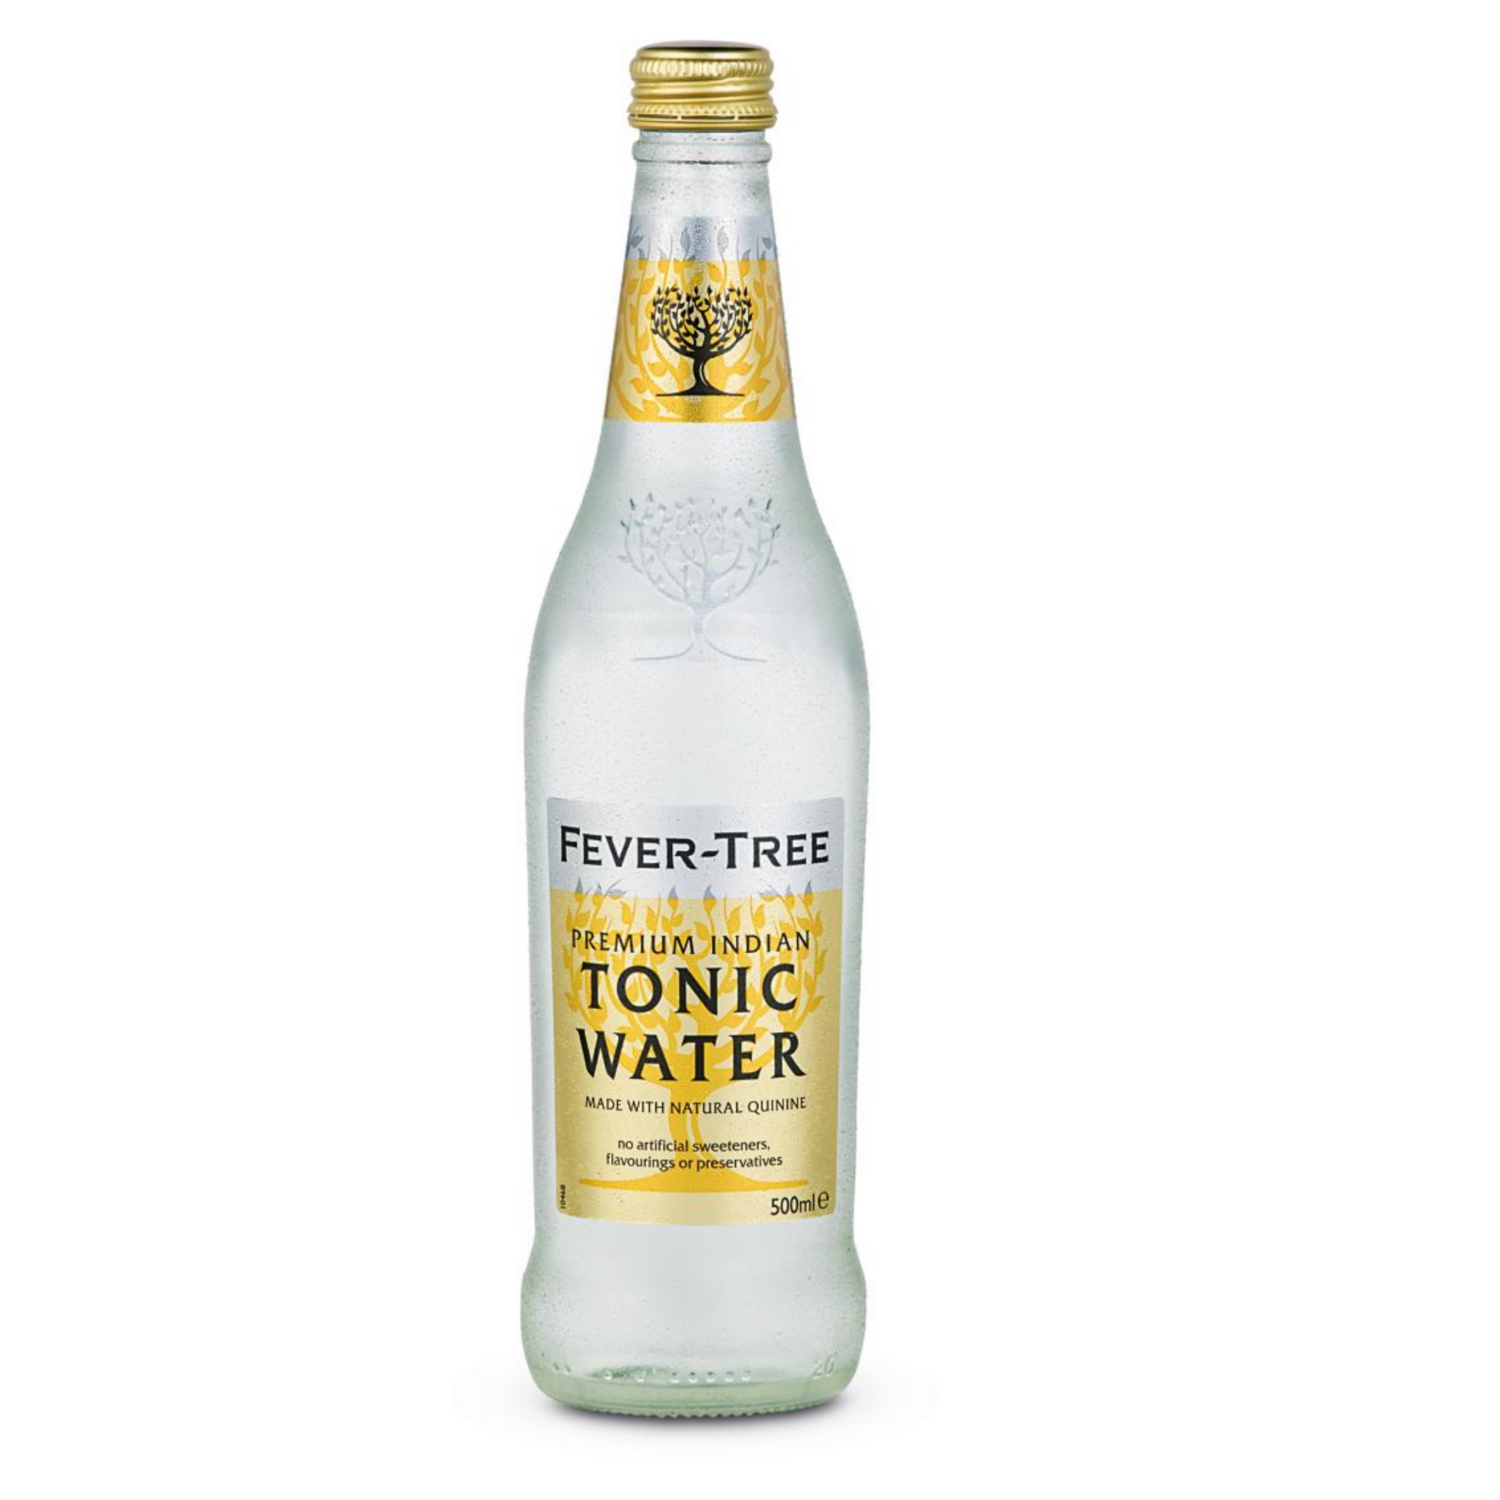 FEVER-TREE Tonic Water, Indian